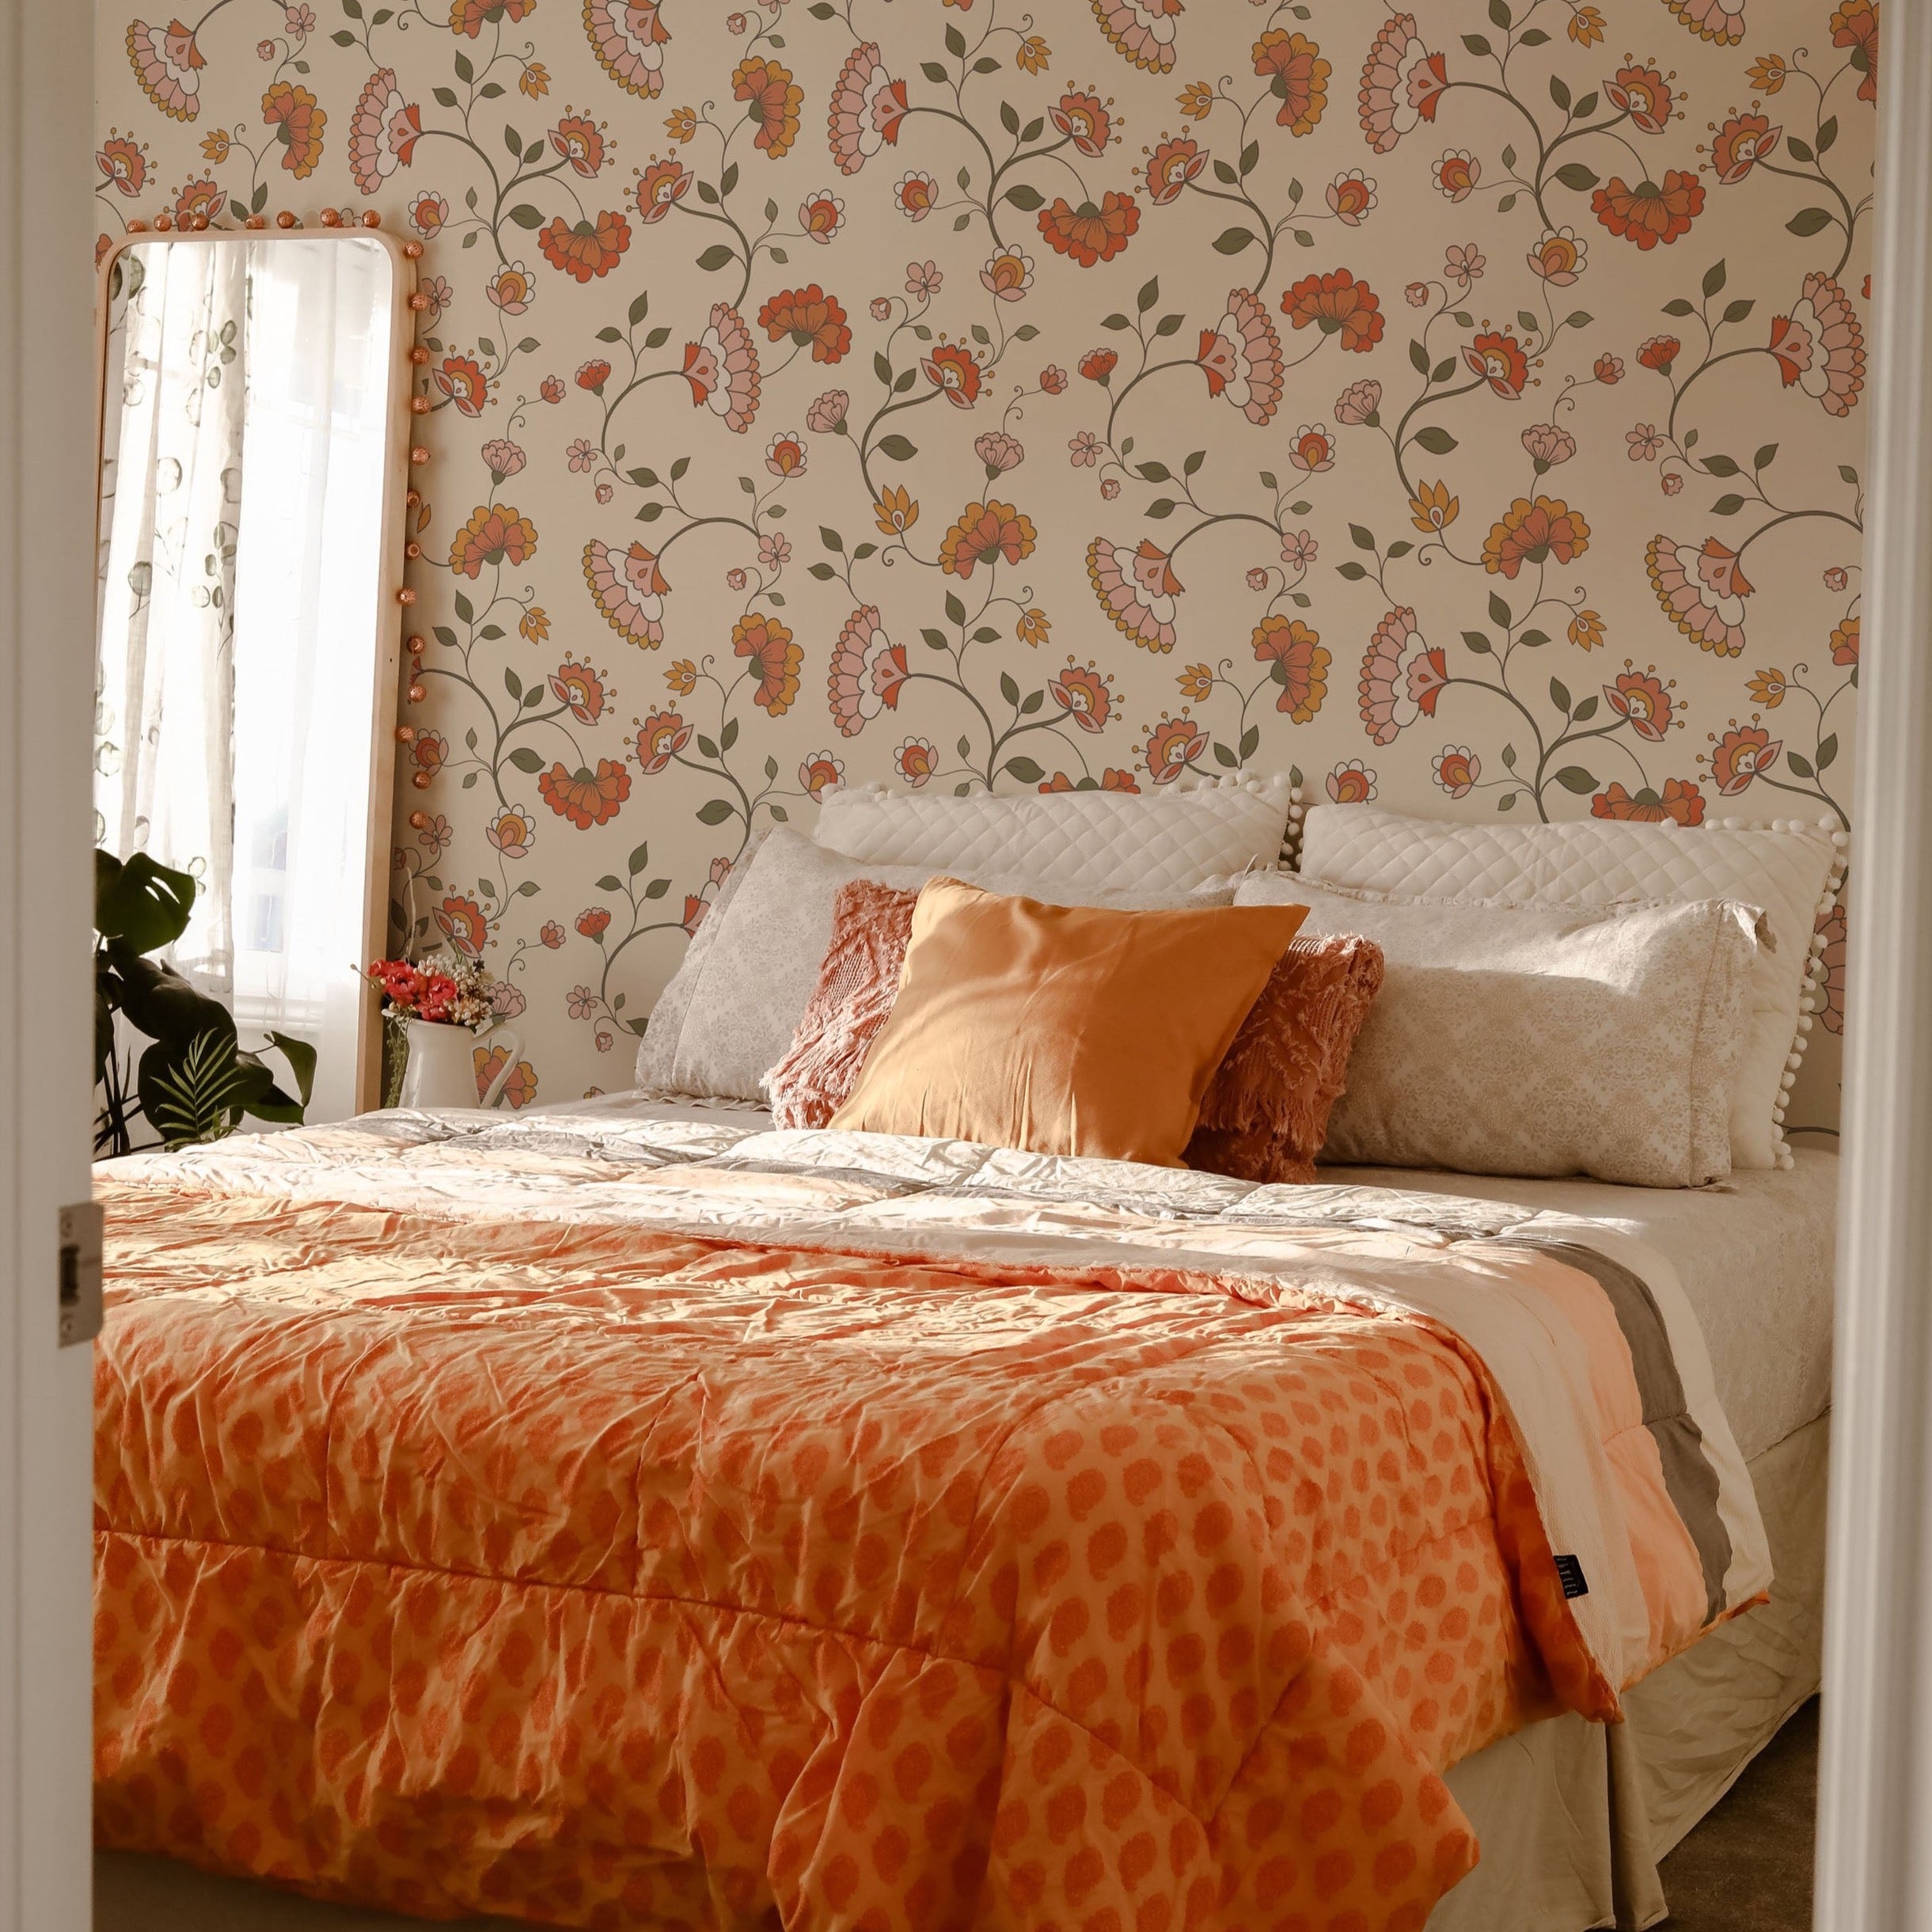 A cozy bedroom filled with natural light, adorned with the Retro Pattern Wallpaper. The room features a bed with an orange textured comforter and decorative pillows in shades of orange and cream, harmoniously blending with the room's warm color scheme